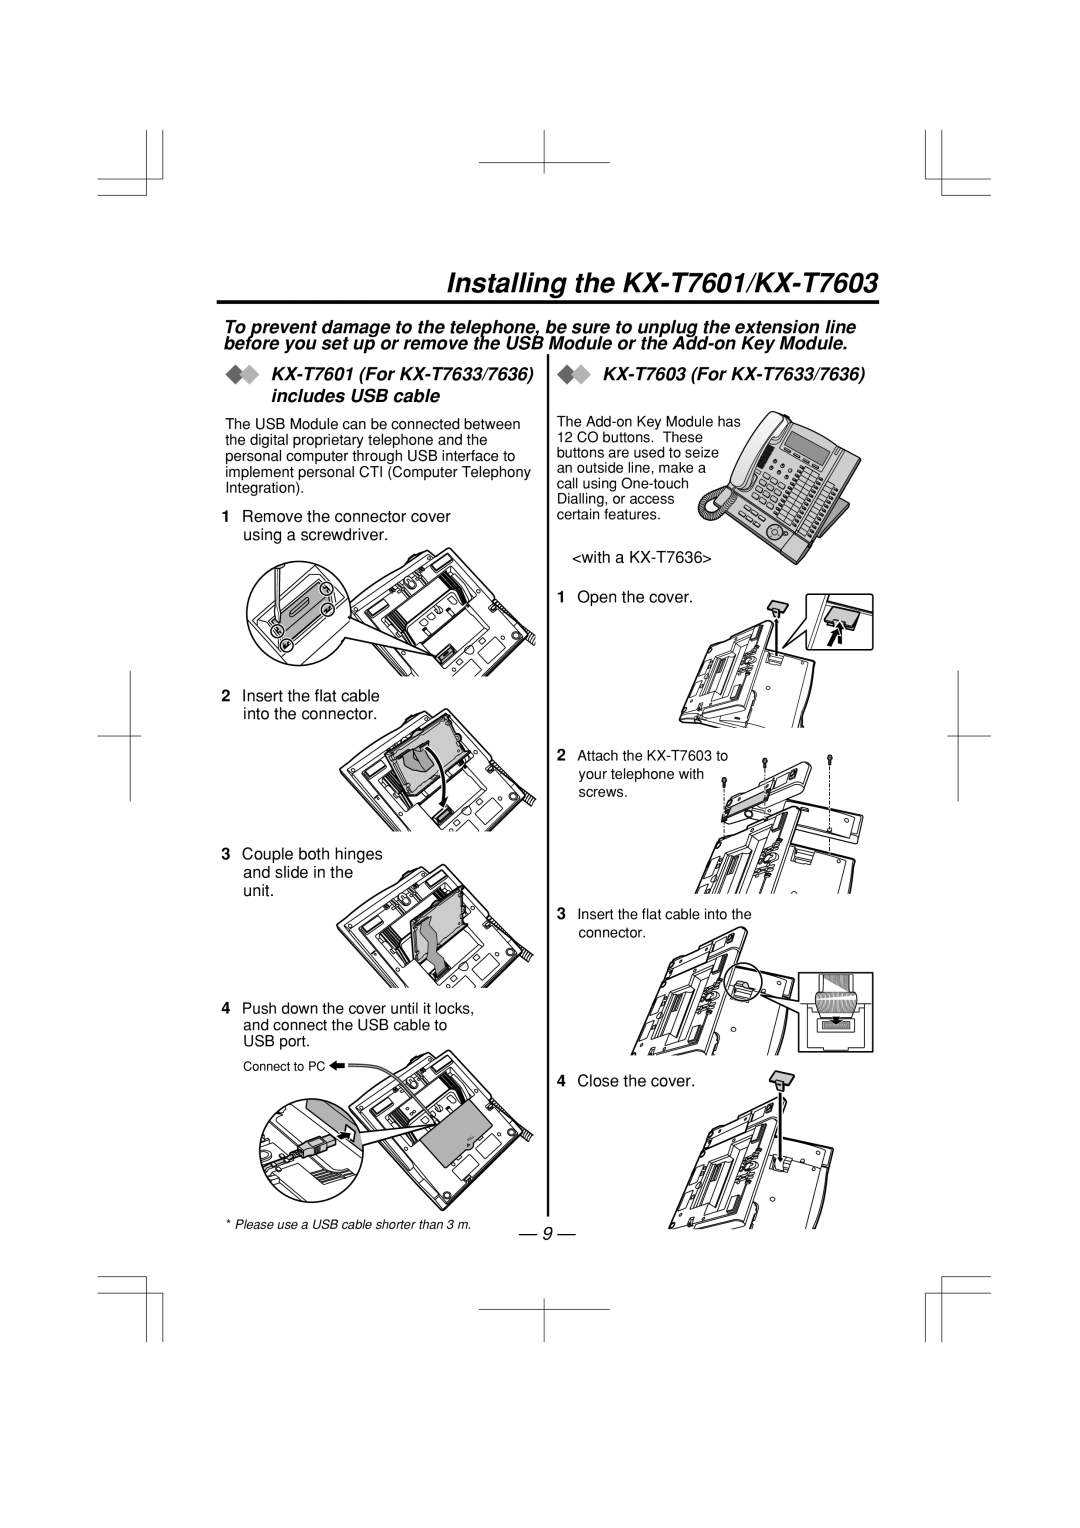 Panasonic KX-T7633E Installing the KX-T7601/KX-T7603, KX-T7601 For KX-T7633/7636 includes USB cable, and slide in the unit 